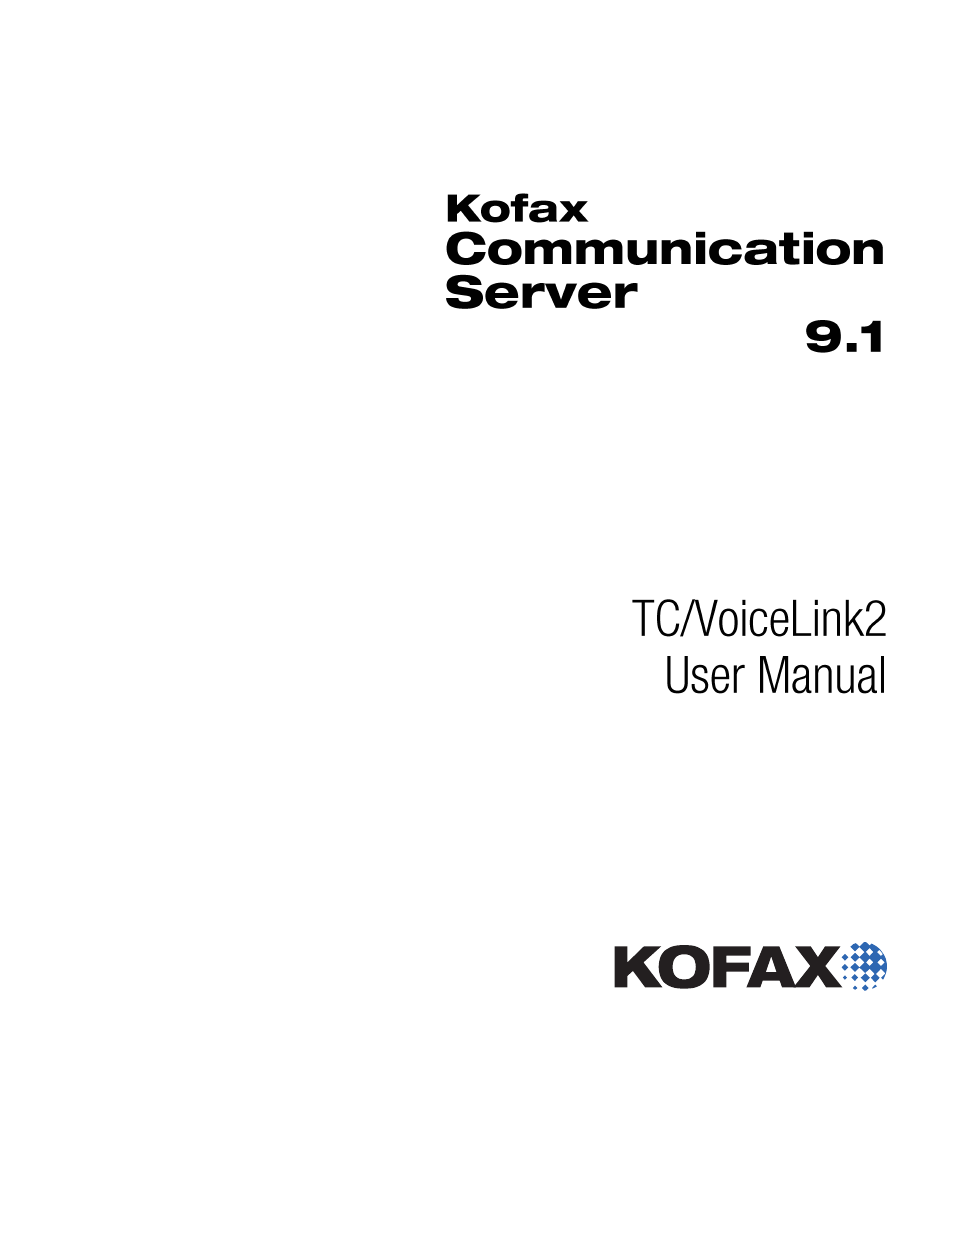 Kofax Communication Server 9.1 User Manual | 8 pages